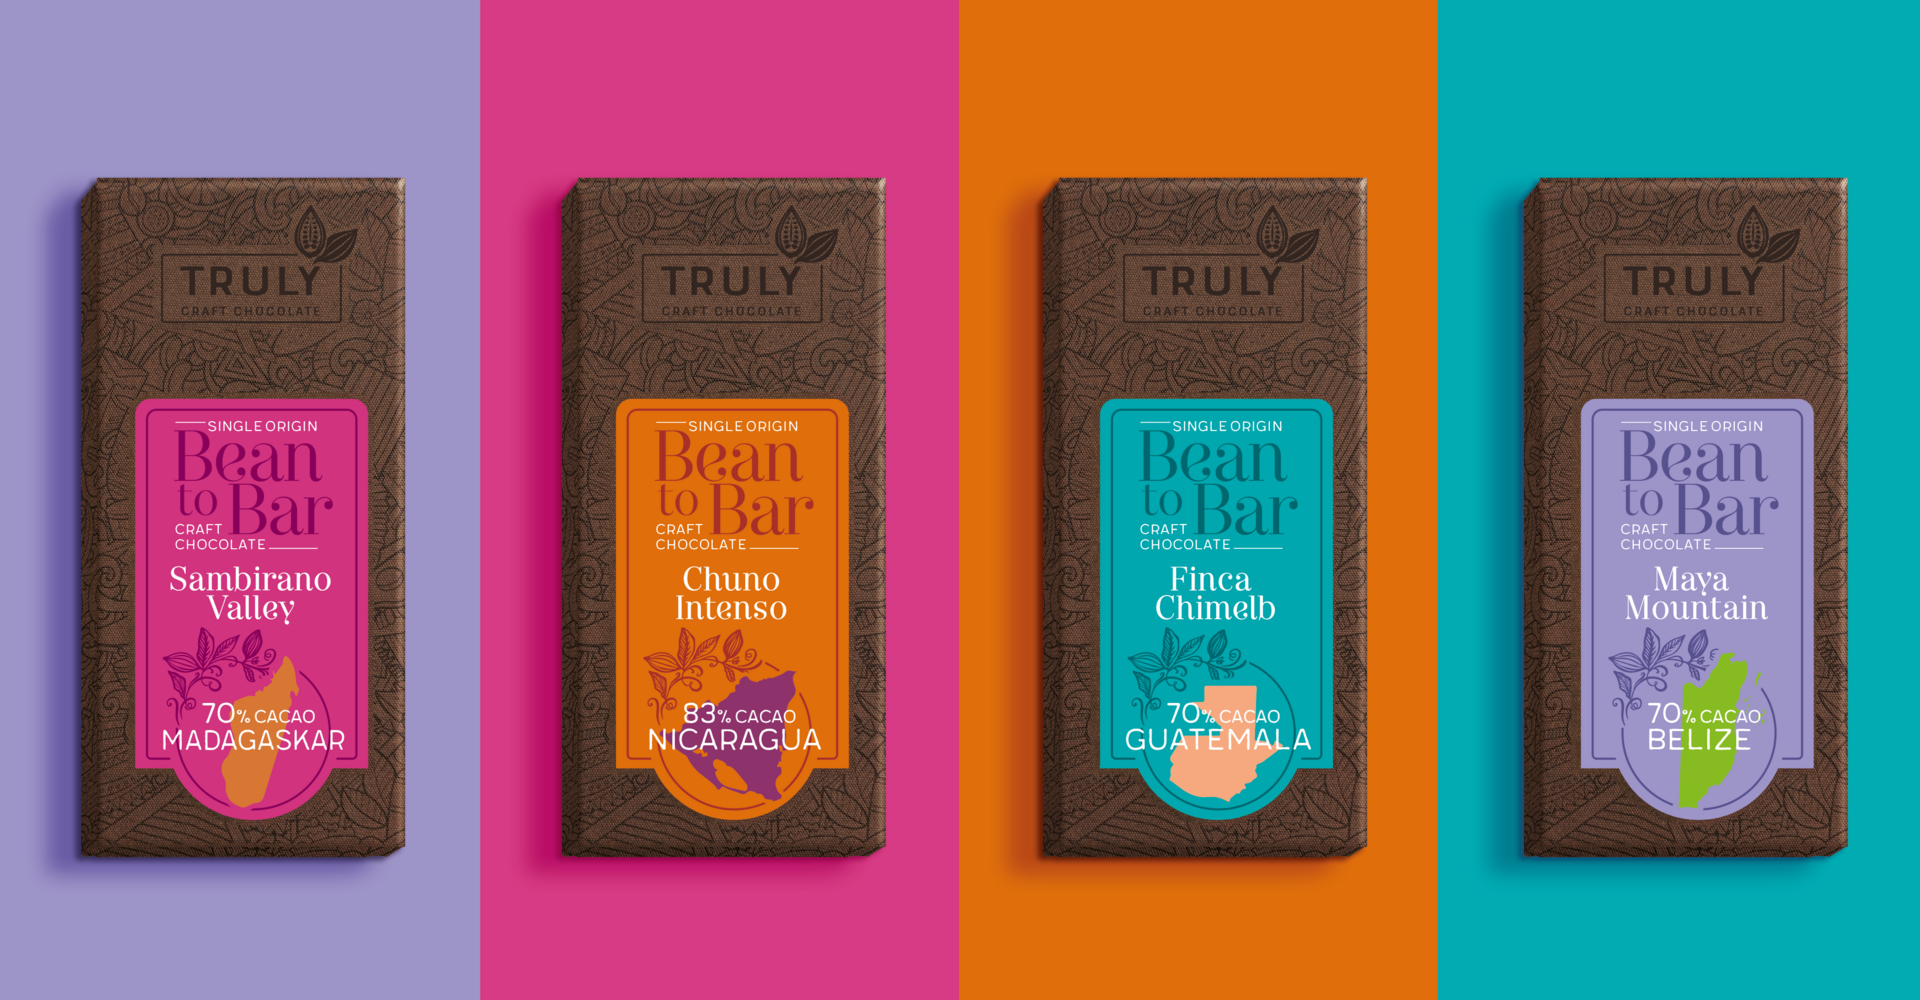 Bean to Bar Truly Craft Chocolate Relaunch graphic design branding strategy logo design packaging design POS material